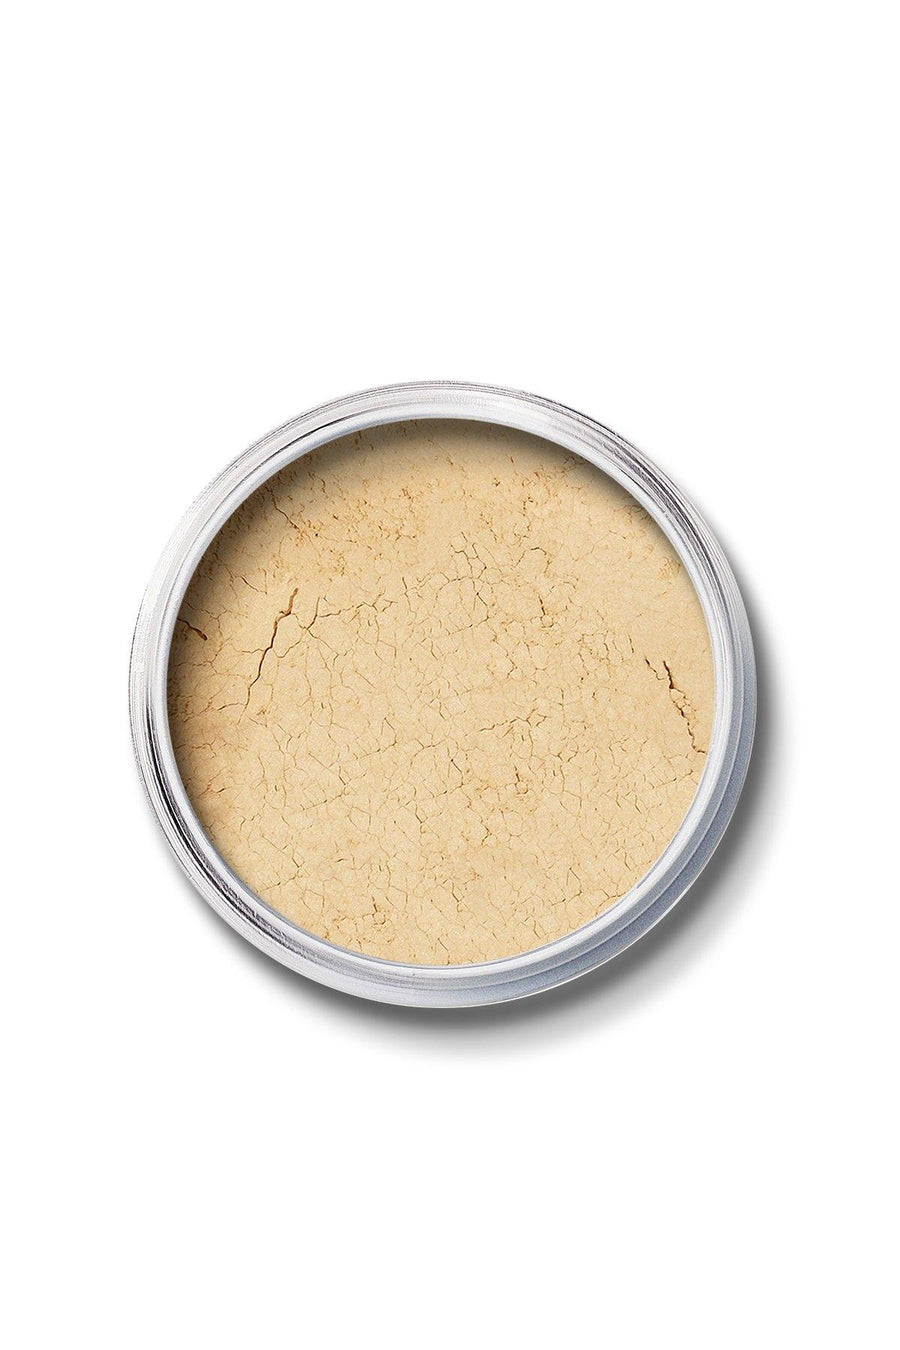 Mineral SPF 15 Foundation #2 - Sunny Beige - Blend Mineral Cosmetics